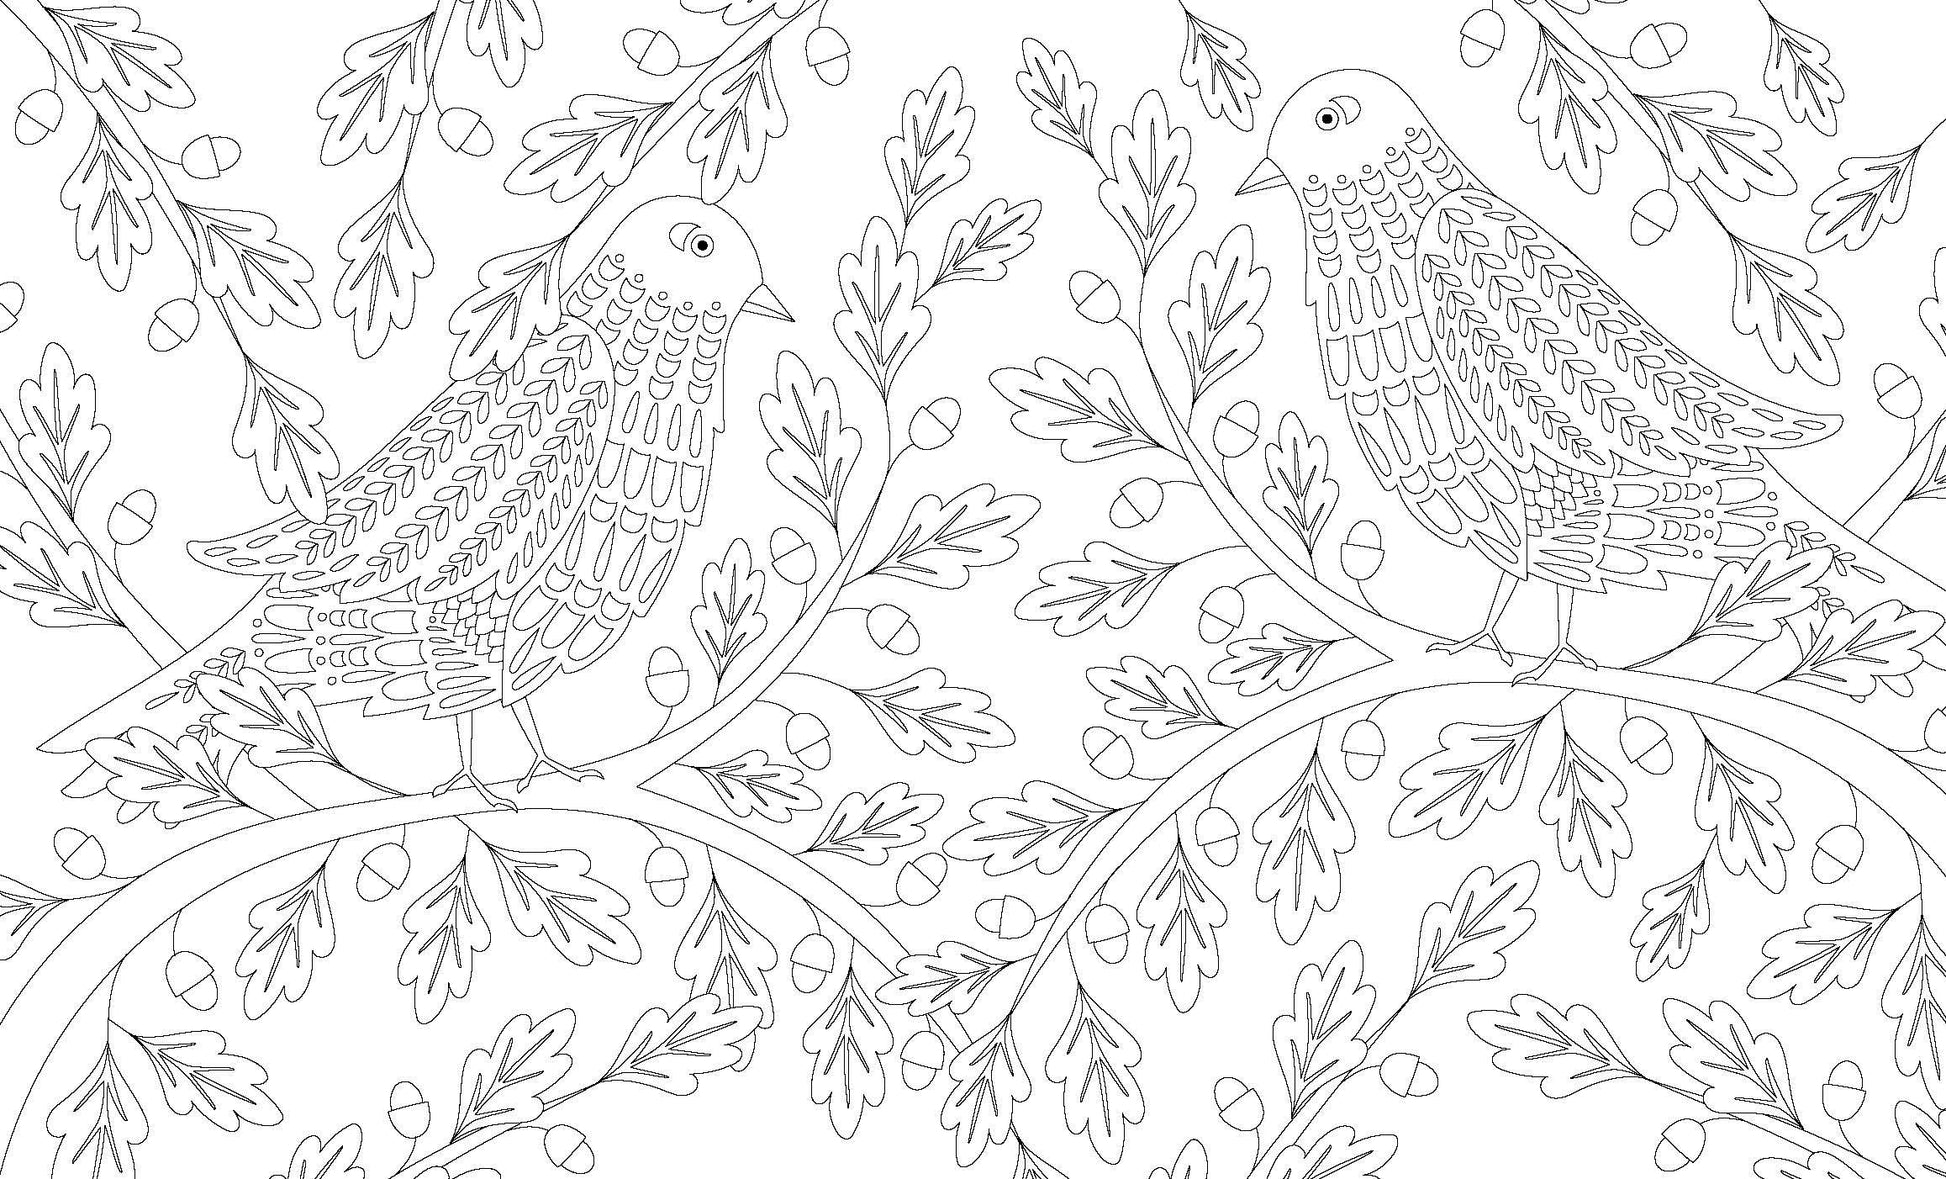 Birds: A Mindful Coloring Book - BookPal